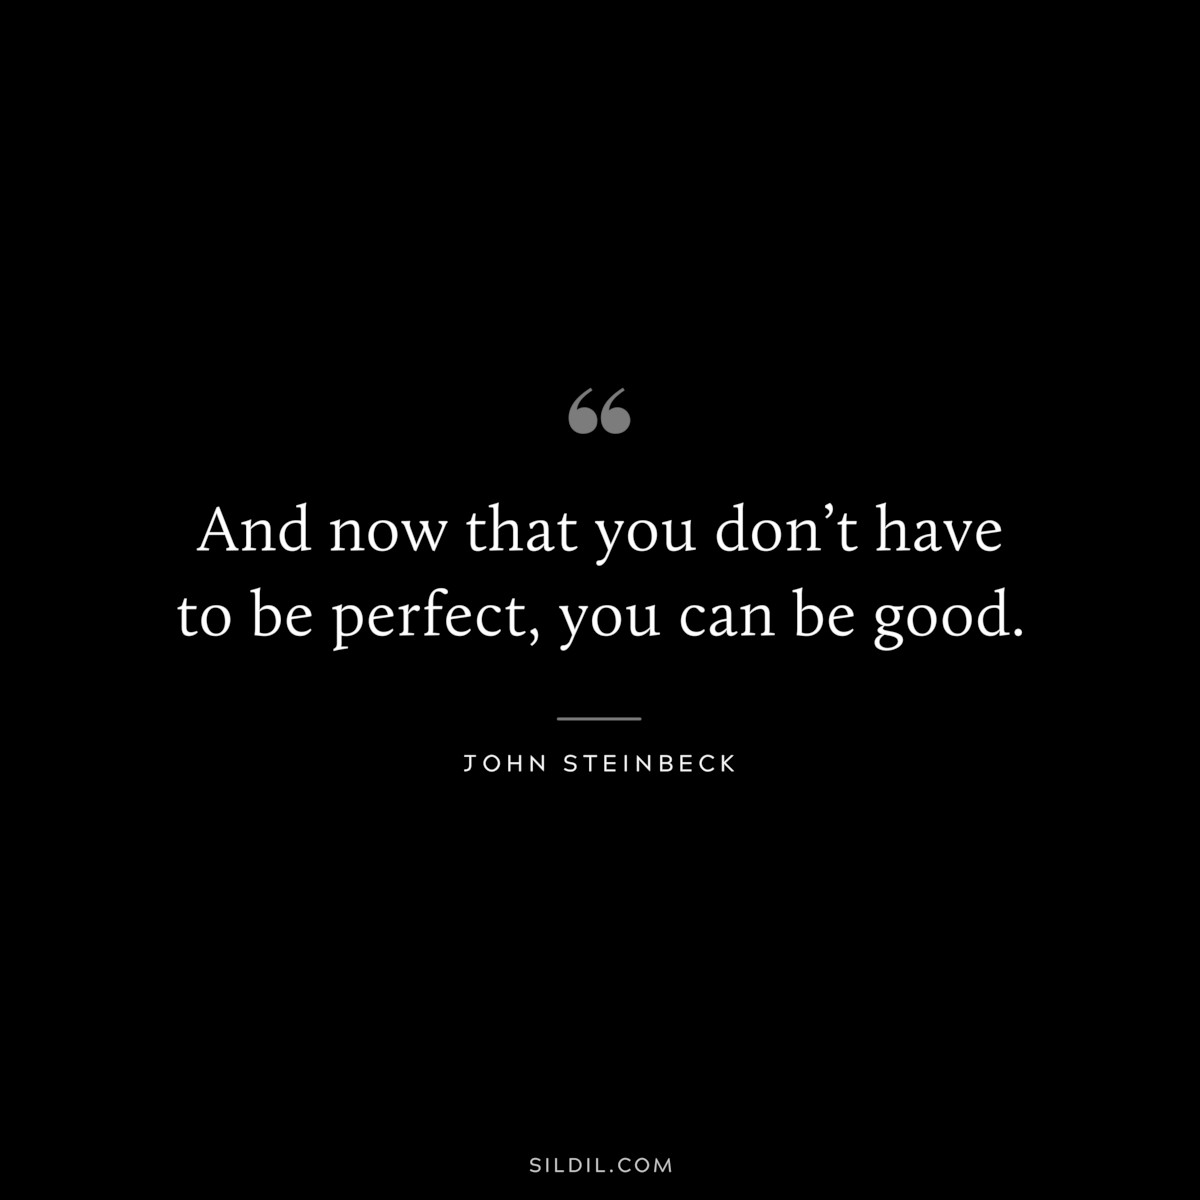 And now that you don’t have to be perfect, you can be good.― John Steinbeck